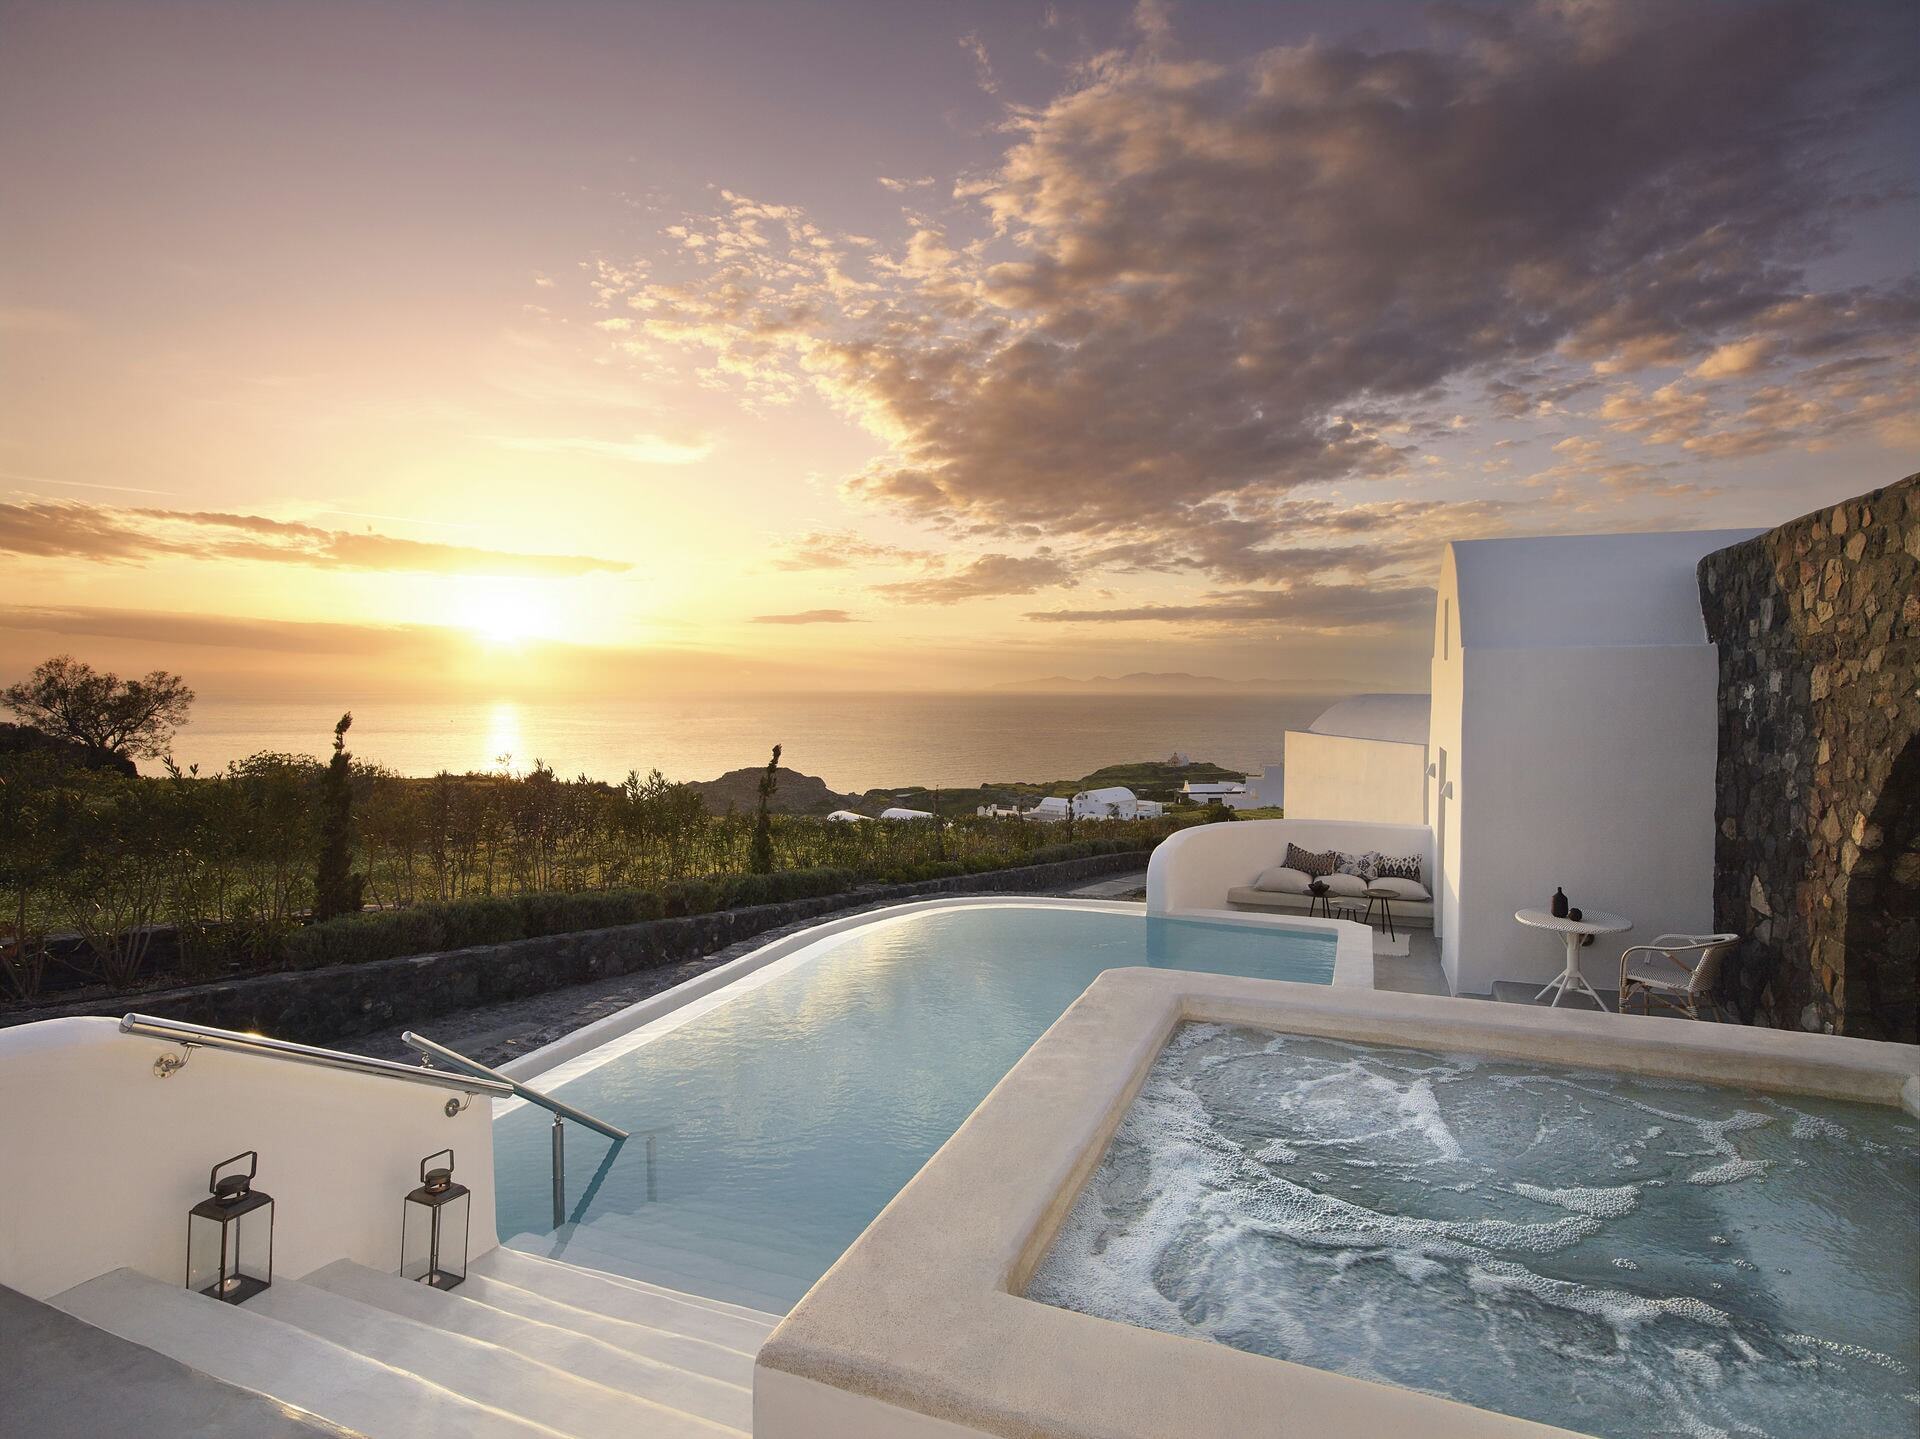 Best Santorini hotels: Top 8 luxury hideaways with a chic atmosphere and unrivaled views of famous sunsets